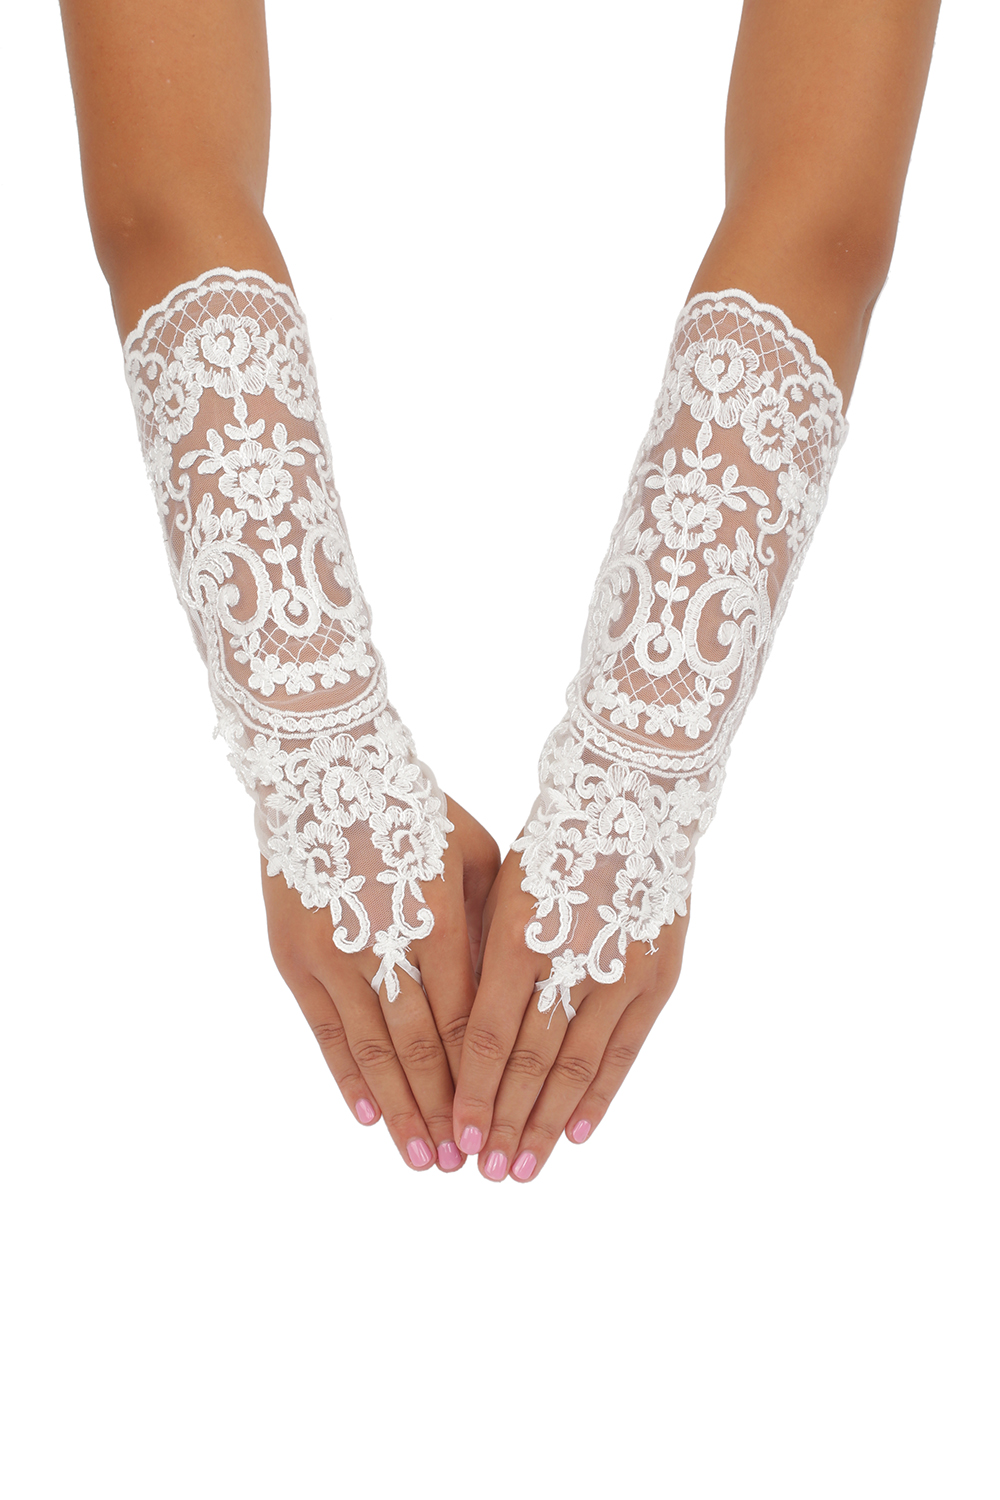 Semi Long Quality Fingerless Lace Embroidered Wedding Gloves For Bride 8BL